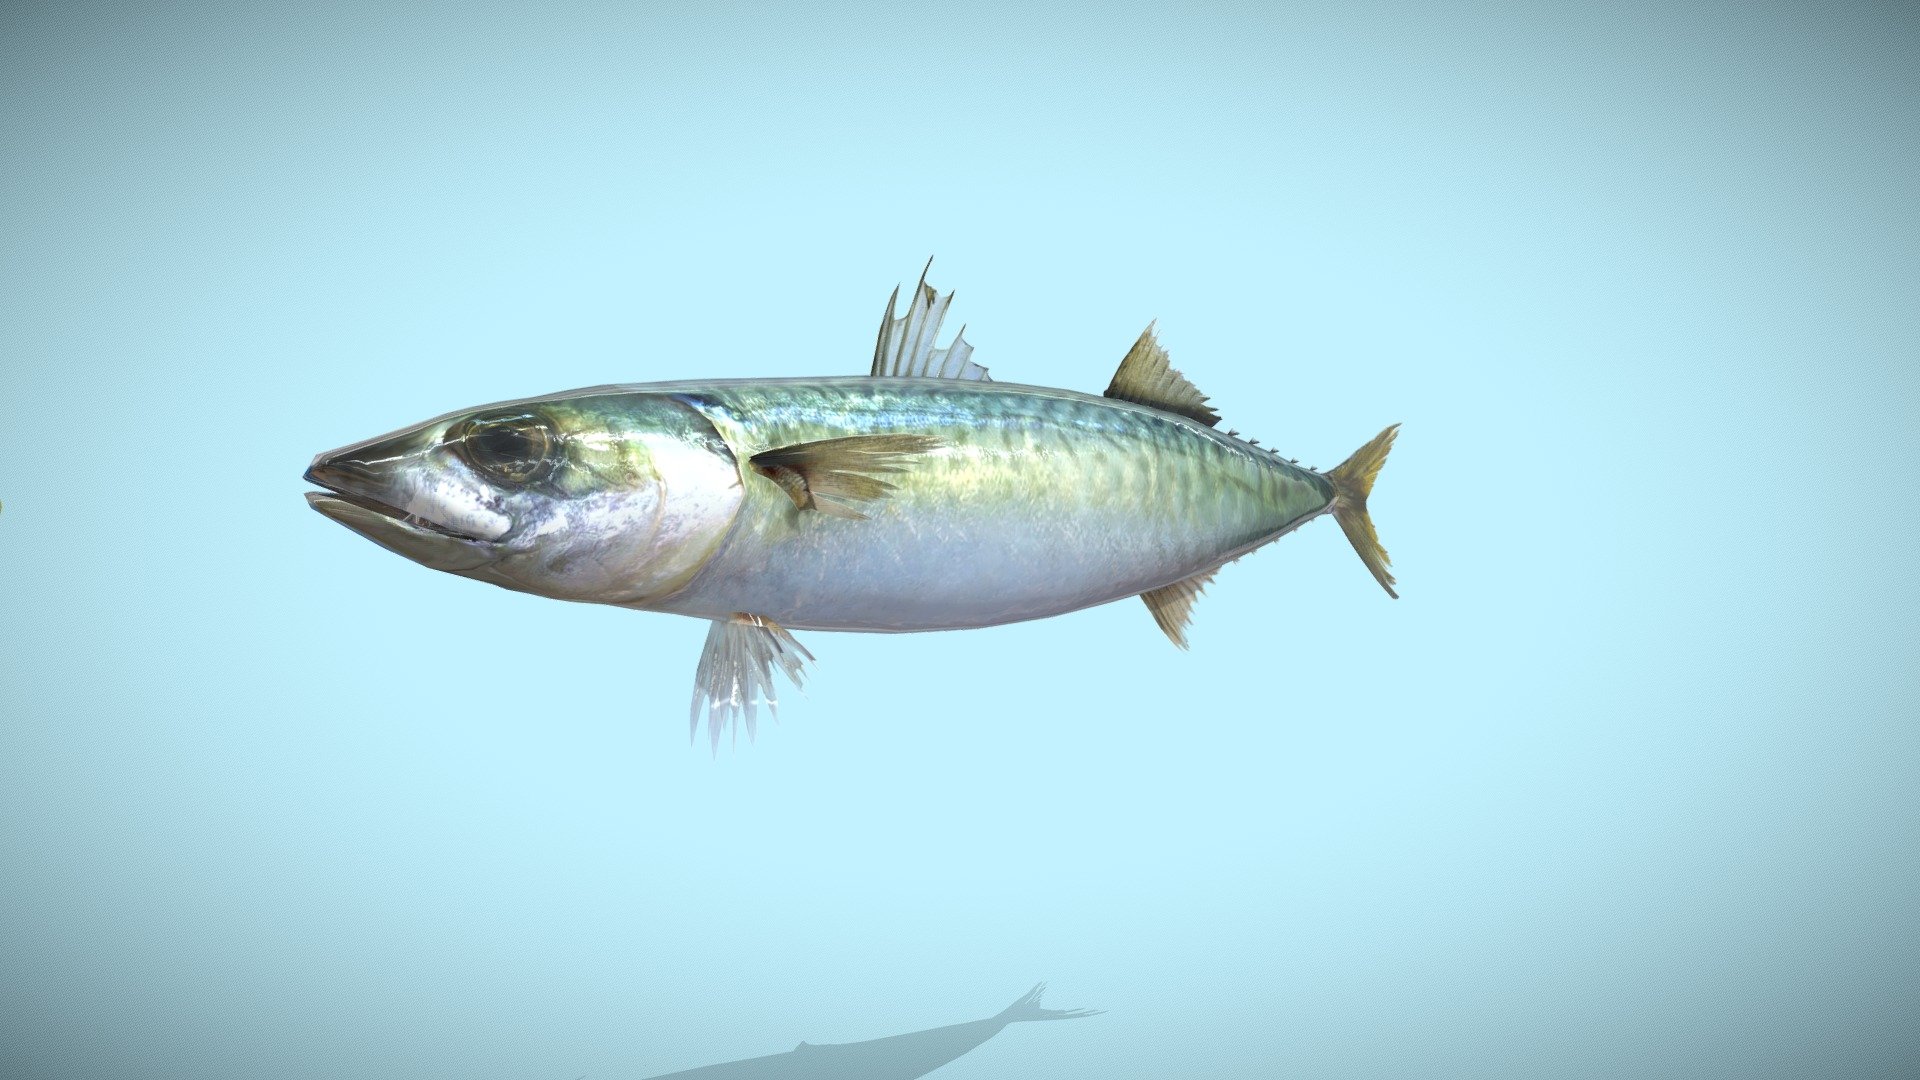 I'm producing aiming at realistic fish. It was made in Blender.
There are a blender file and a fbx file for Unity.
fbx for Unity makes the fin tension of both sides. WebGL used actually in unity
Please refer to this　website.
https://turidata.blog.fc2.com/blog-entry-28.html

When needing more detailed information about fish, please refer to osakana watch. It's my site  (language: Japanese).

A material is 2048 x 2048 and part 1100 x 1100.
When there is your request, I'll sell it by 20-30$. (file:Blender,gltf,fbx,obj,etc&hellip;)

リアルな魚を目指して制作しています。Blenderで作成しました。
Unity用ではblenderファイル、fbxファイルがあります。
Unity用のfbxはヒレなどを両面張りにしています。unityで実際に使用されているWebGLはこちらをご参照ください。
https://turidata.blog.fc2.com/blog-entry-28.html

さらに魚についての詳しい情報が必要であれば、osakana watch運営サイトをご参照ください(言語:日本語)

ご要望があれば20～30$で販売いたします。(file:Blender,gltf,fbx,obj,etc&hellip;)
マティリアルは2048×2048と一部1100×1100などです。 - マサバ(Chub mackerel)  (old version) - 3D model by tanigutisora (@osakanaWatch) 3d model